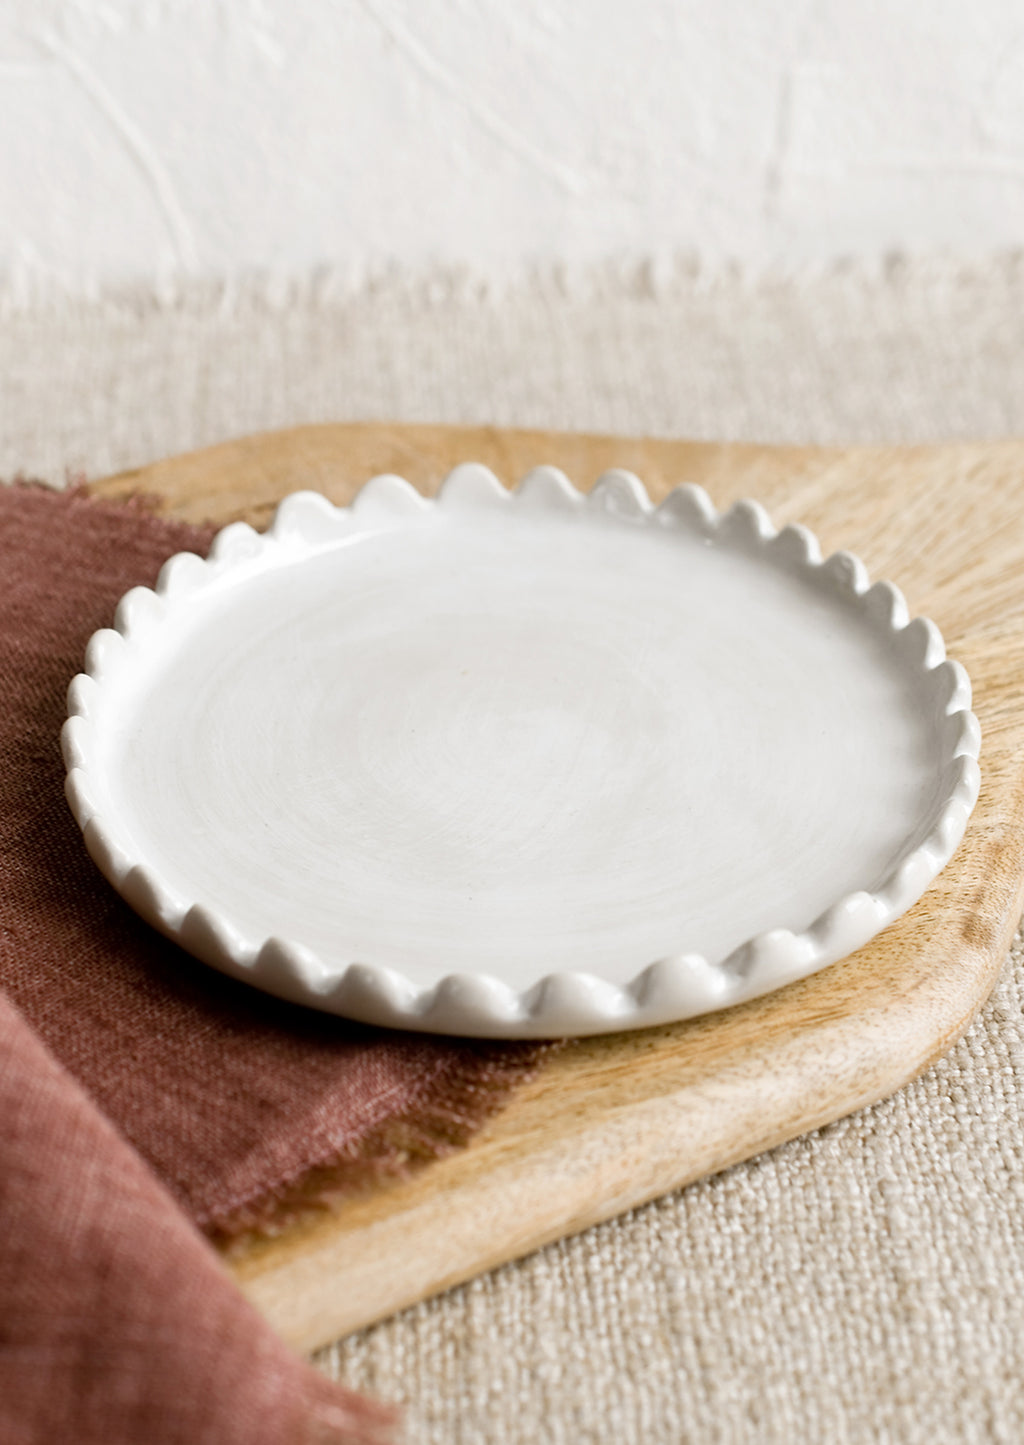 2: A round ceramic plate in white with scalloped edges.